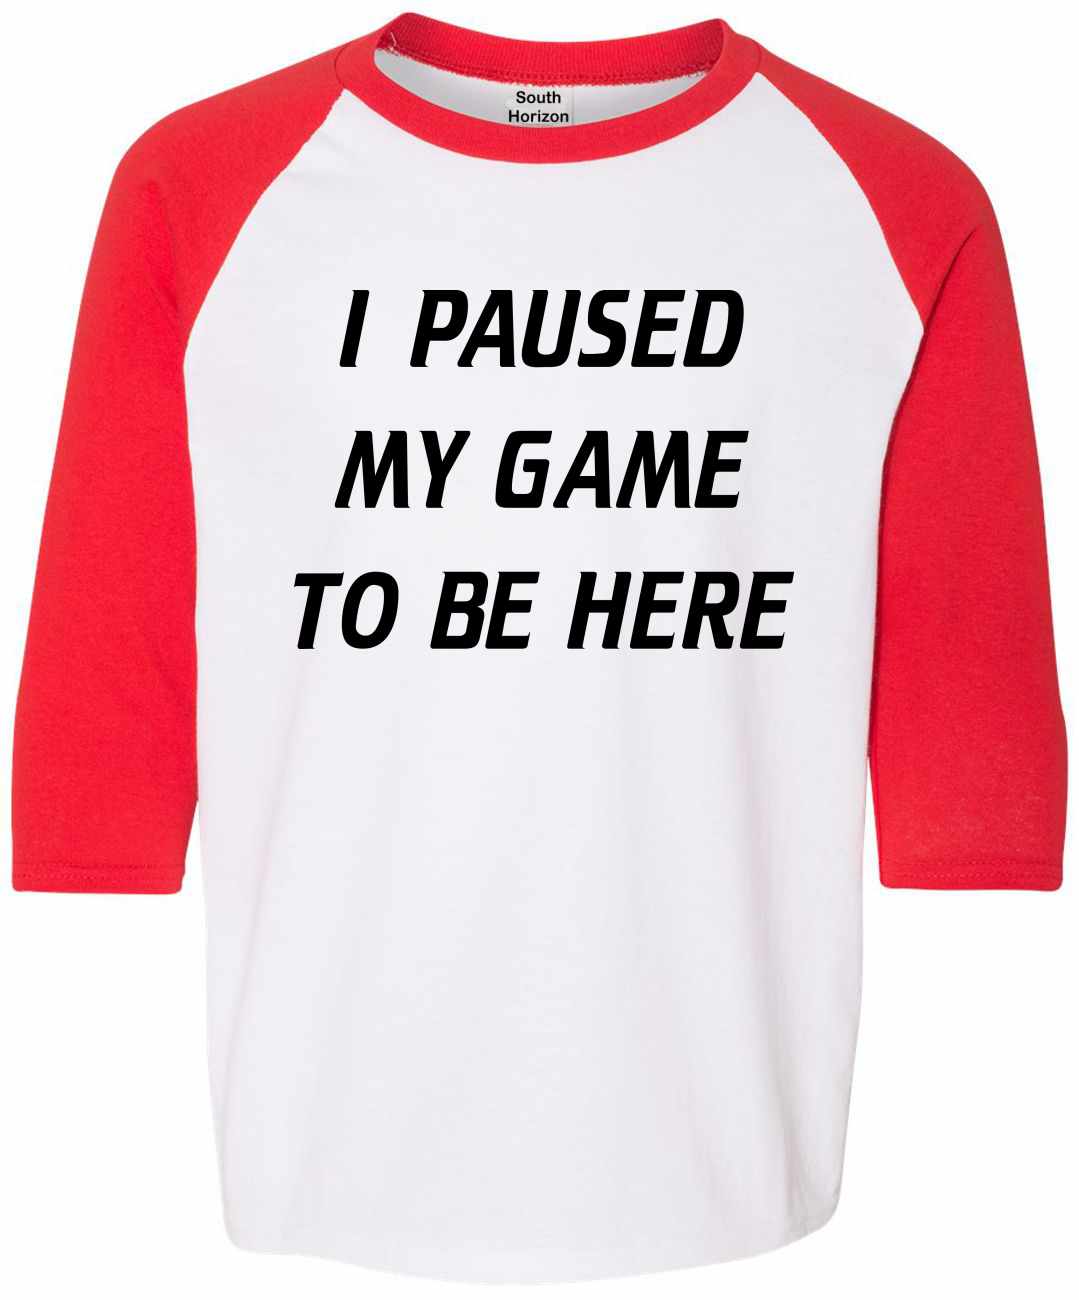 I Paused My Game to Be Here on Youth Baseball Shirt (#970-212)